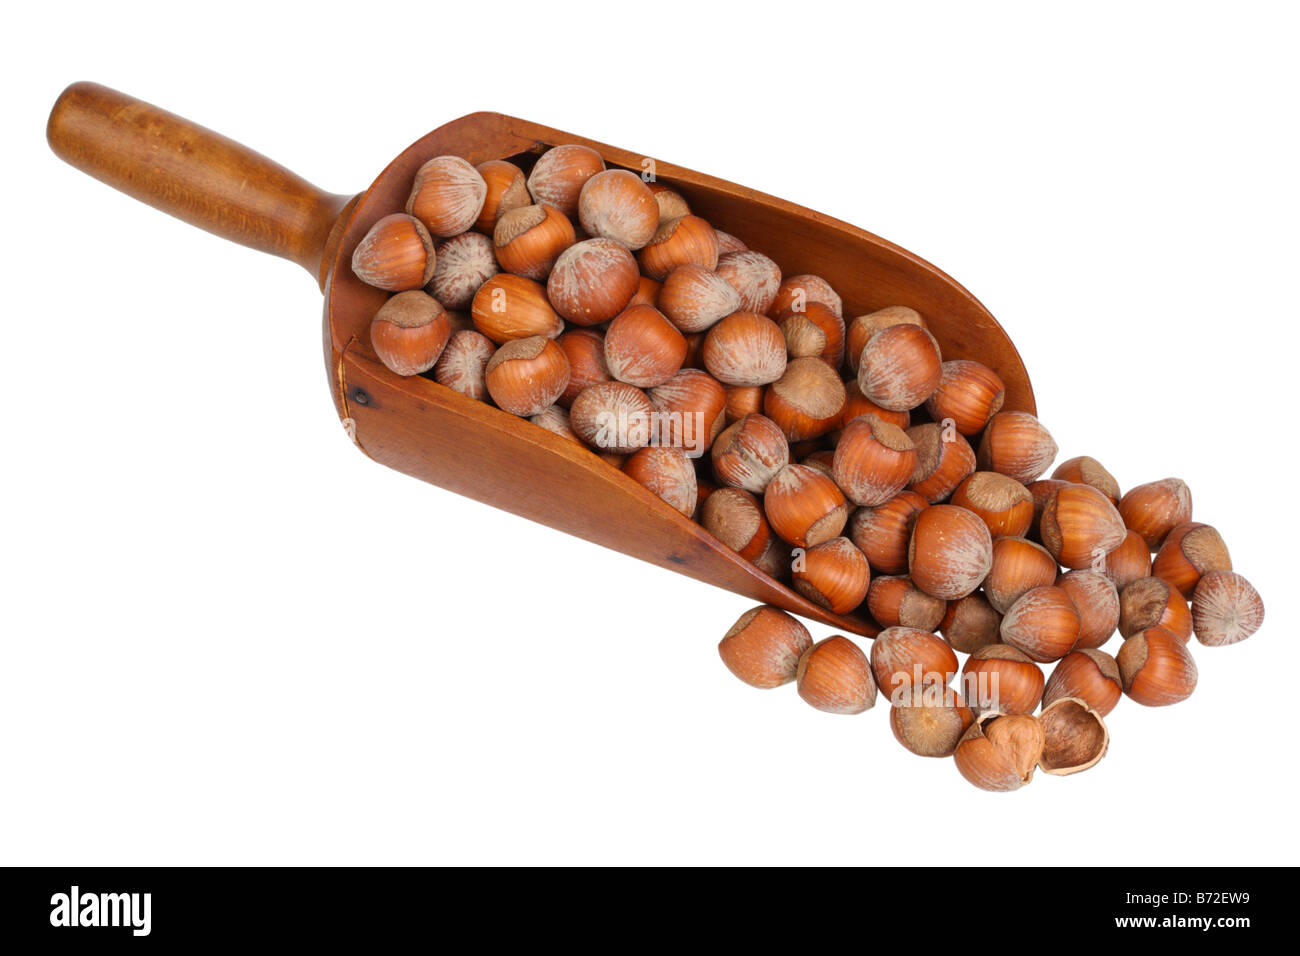 Wooden scoop of hazelnuts cut out on white background Stock Photo